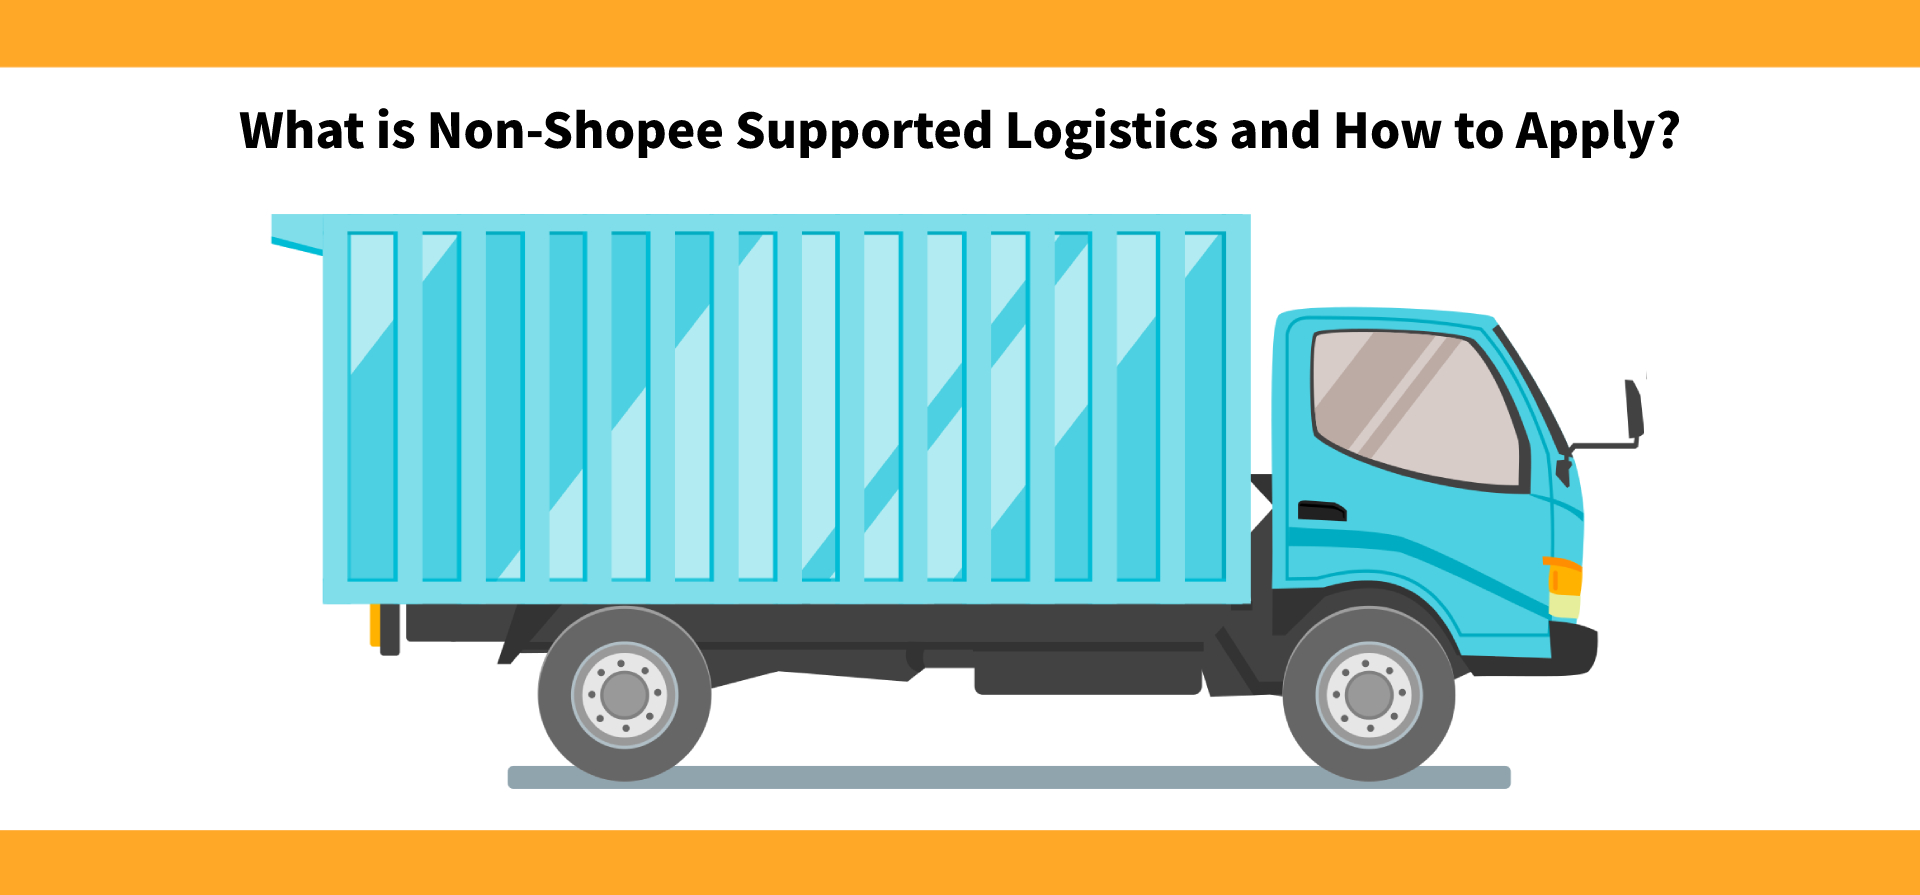 What is Non-Shopee Supported Logistics and How to Apply?